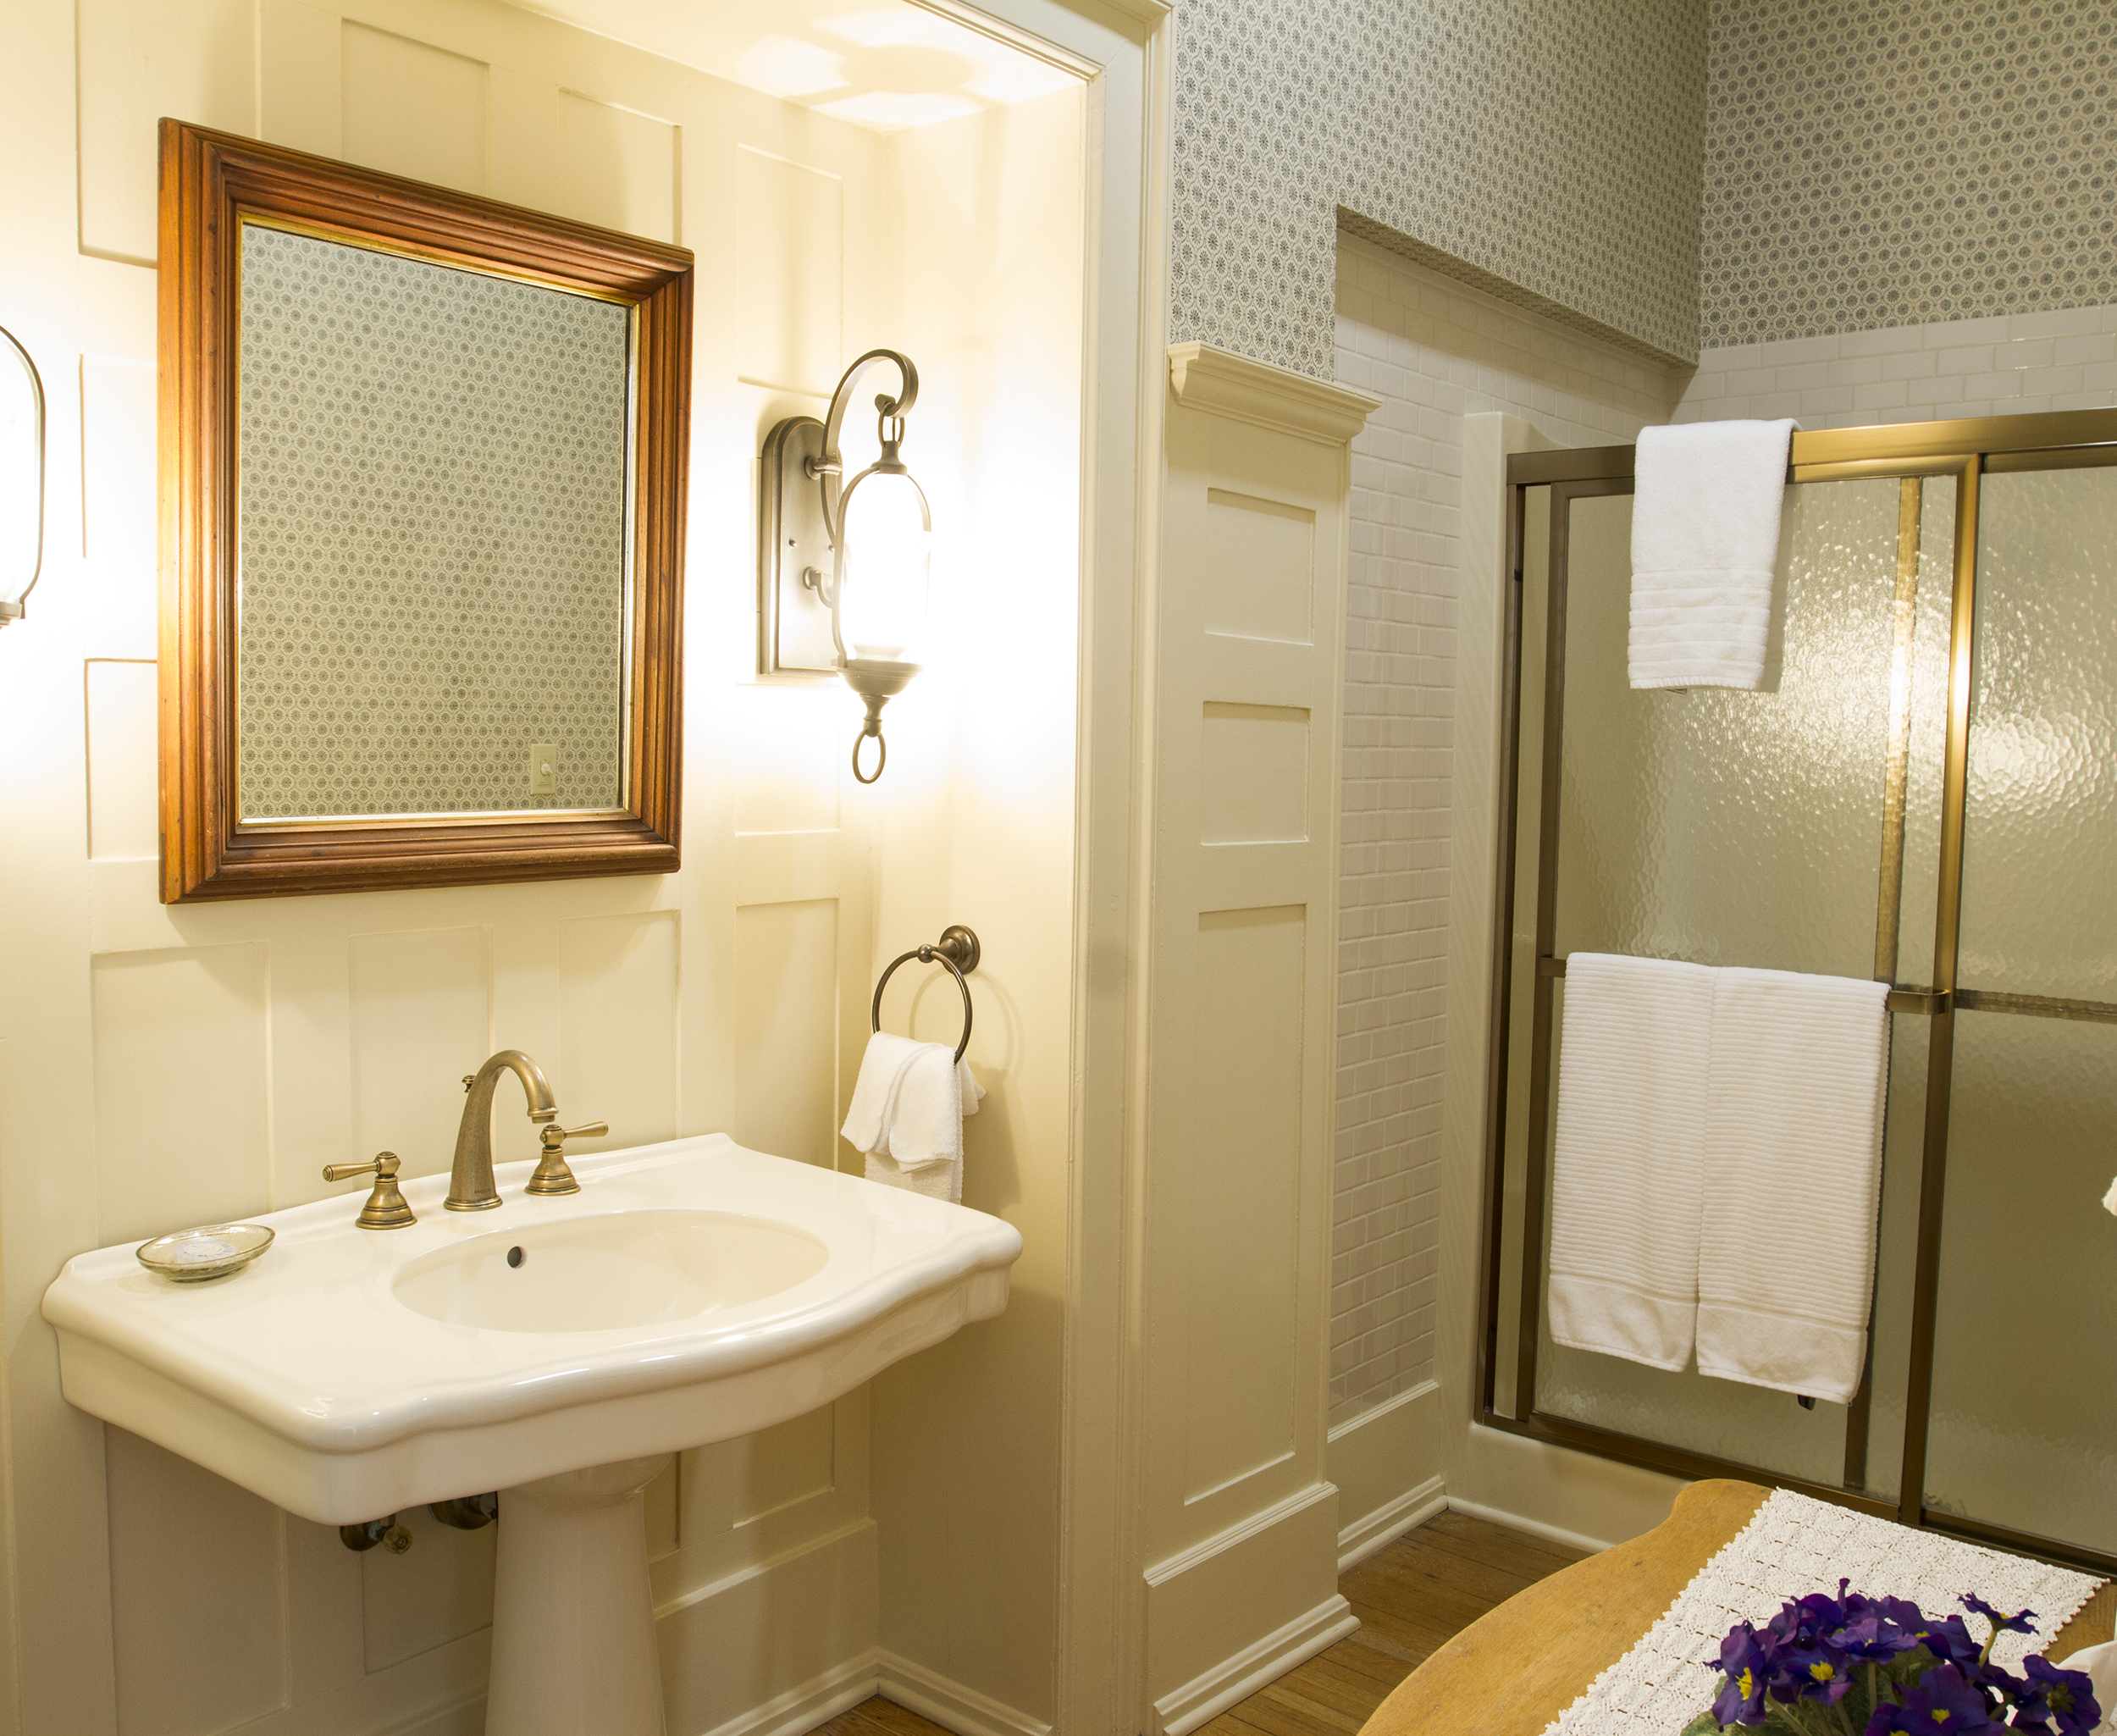 Spacious bathroom with updated fixtures